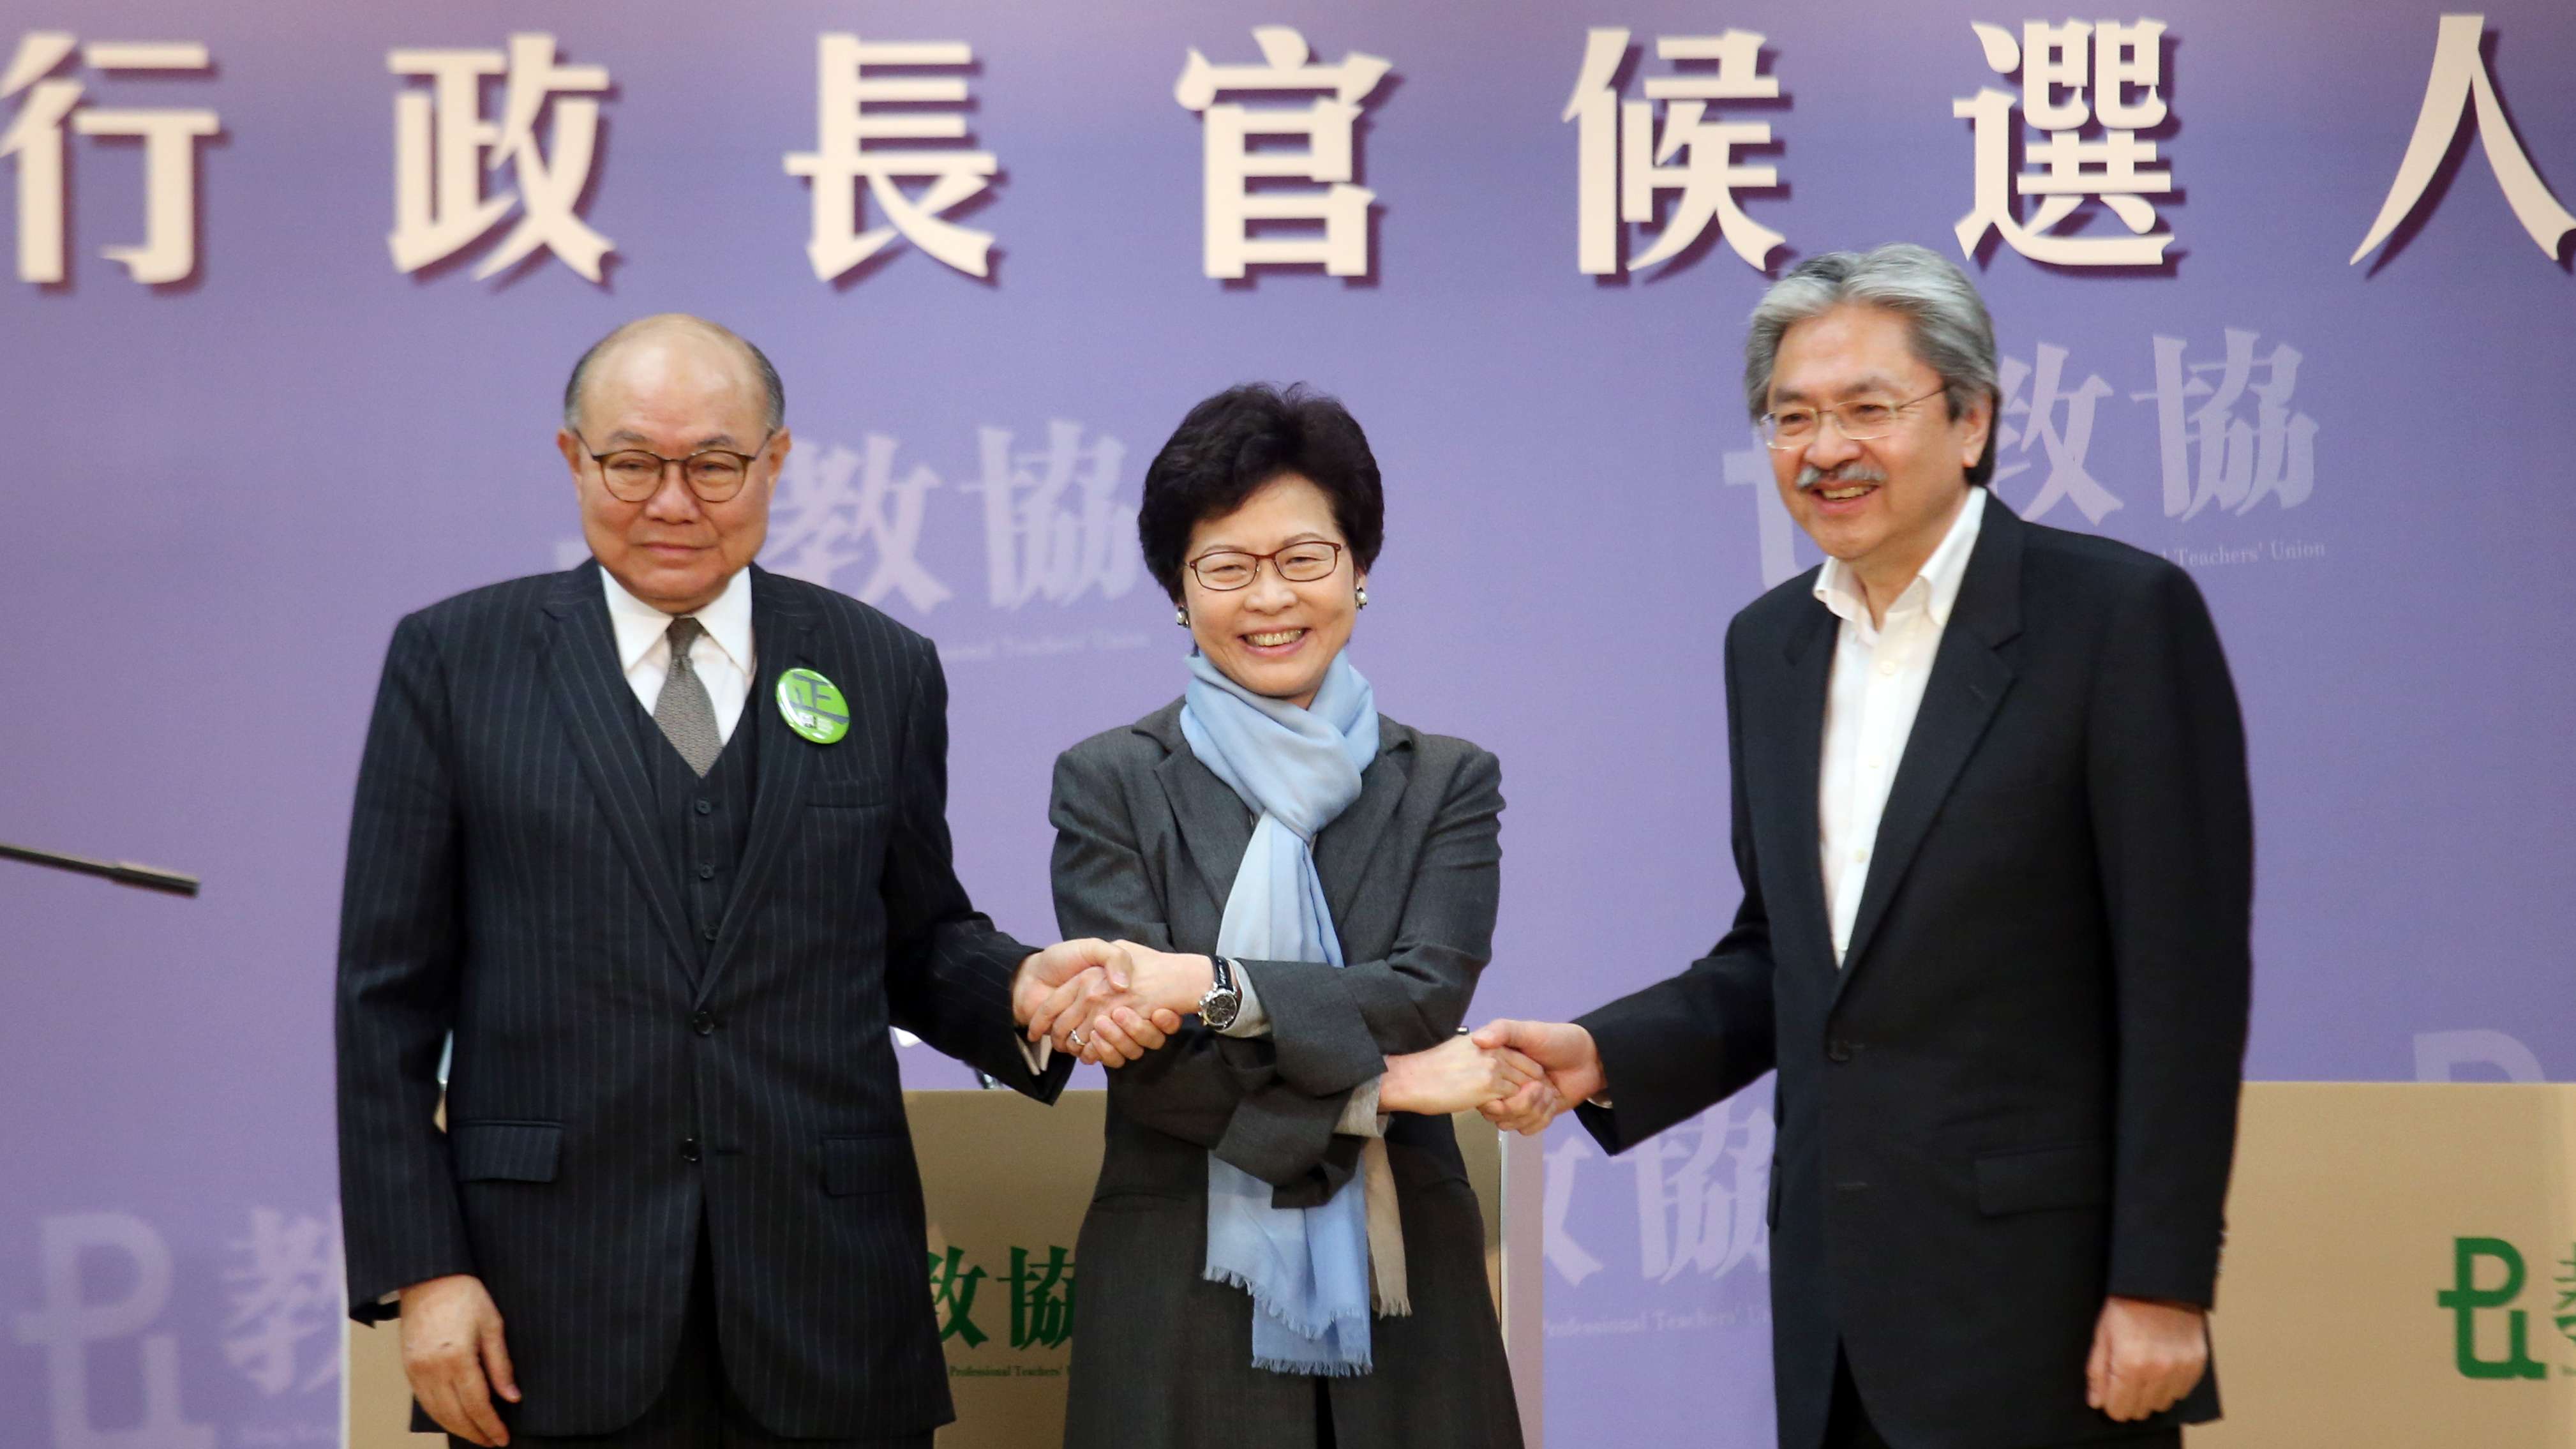 Chief executive candidates retired judge Woo Kwok-hing (left,; Carrie Lam Cheng Yuet-ngor and John Tsang Chun-wah at the 2017 CE Election forum hosted by HK Professional Teachers' Union. Photo: David Wong